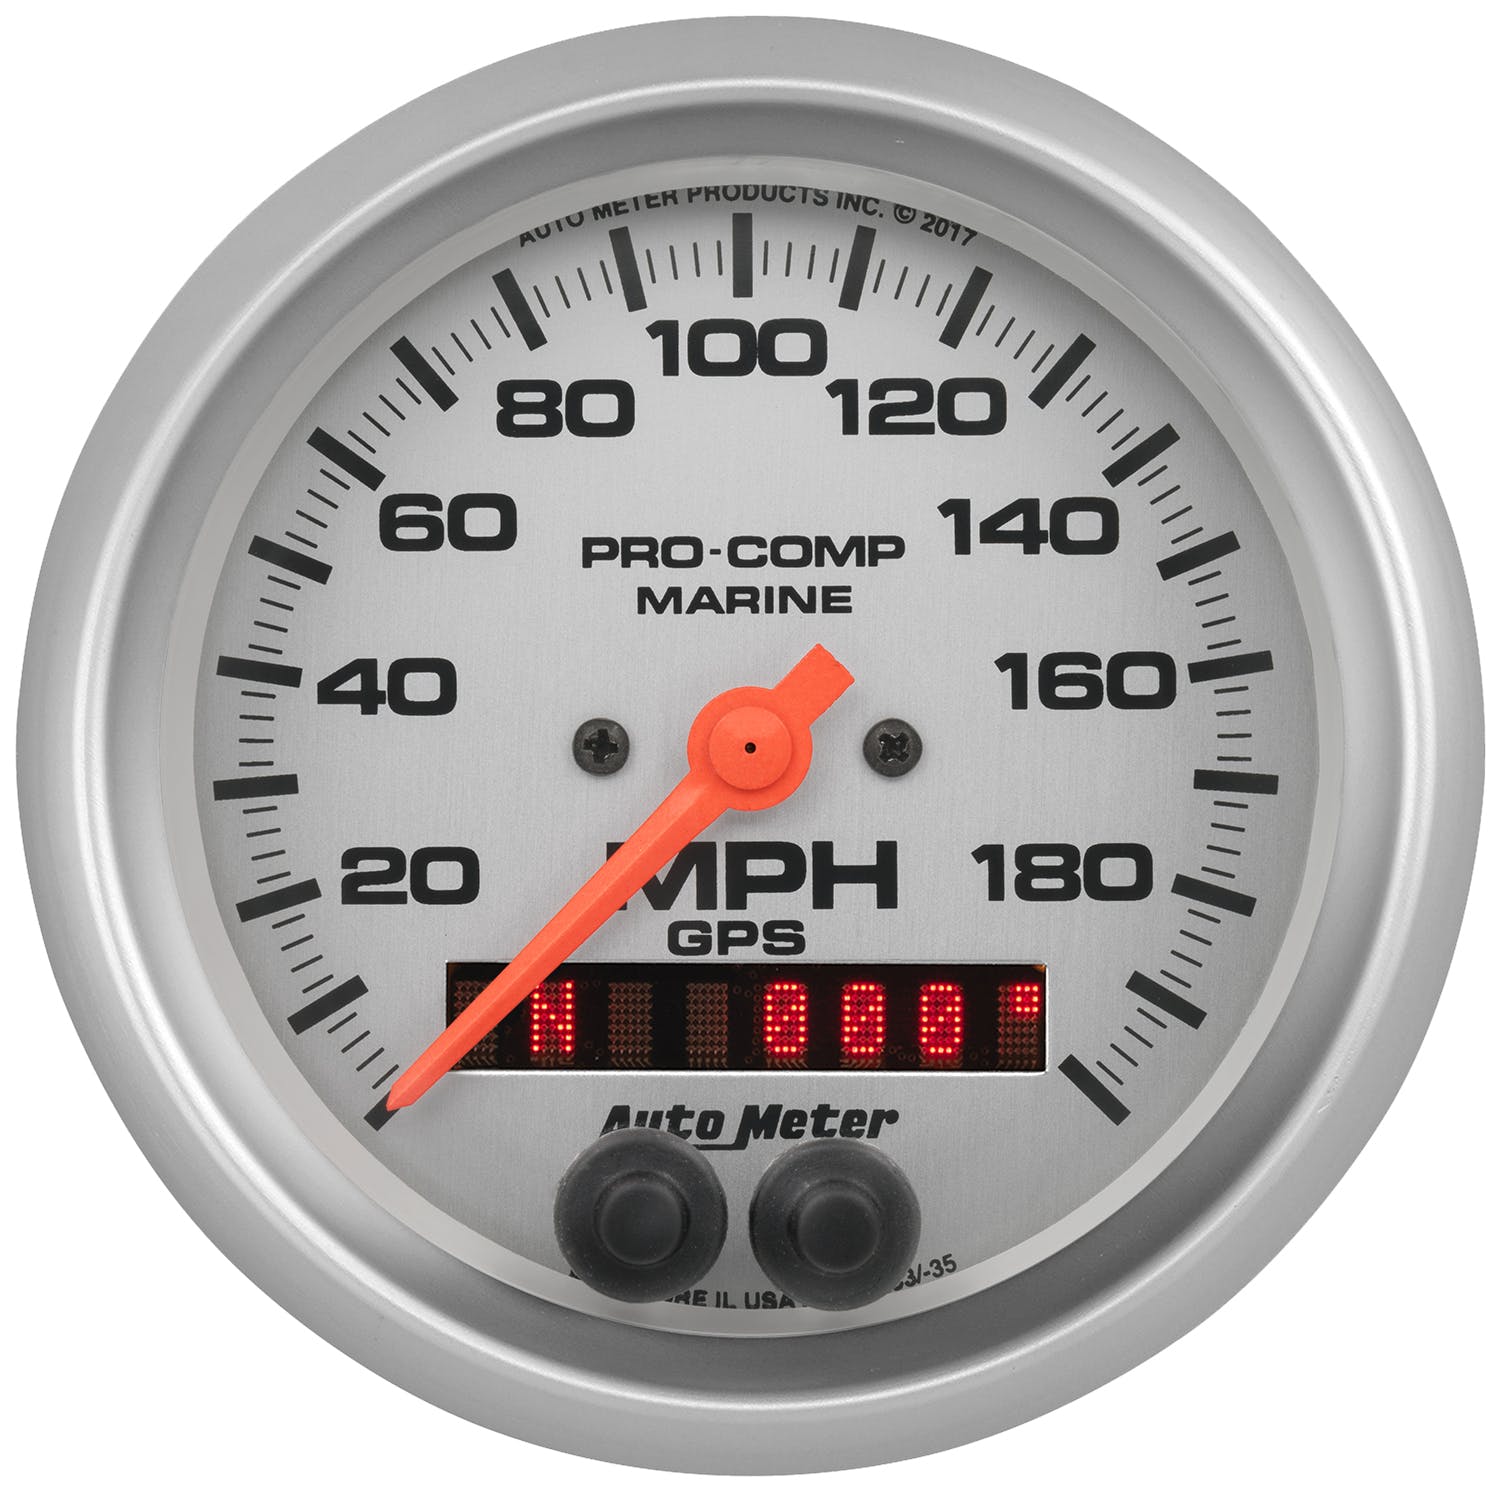 AutoMeter Products 200639-33 Marine Silver Ultra-Lite Speedometer Gauge 3 3/8, 200MPH, GPS